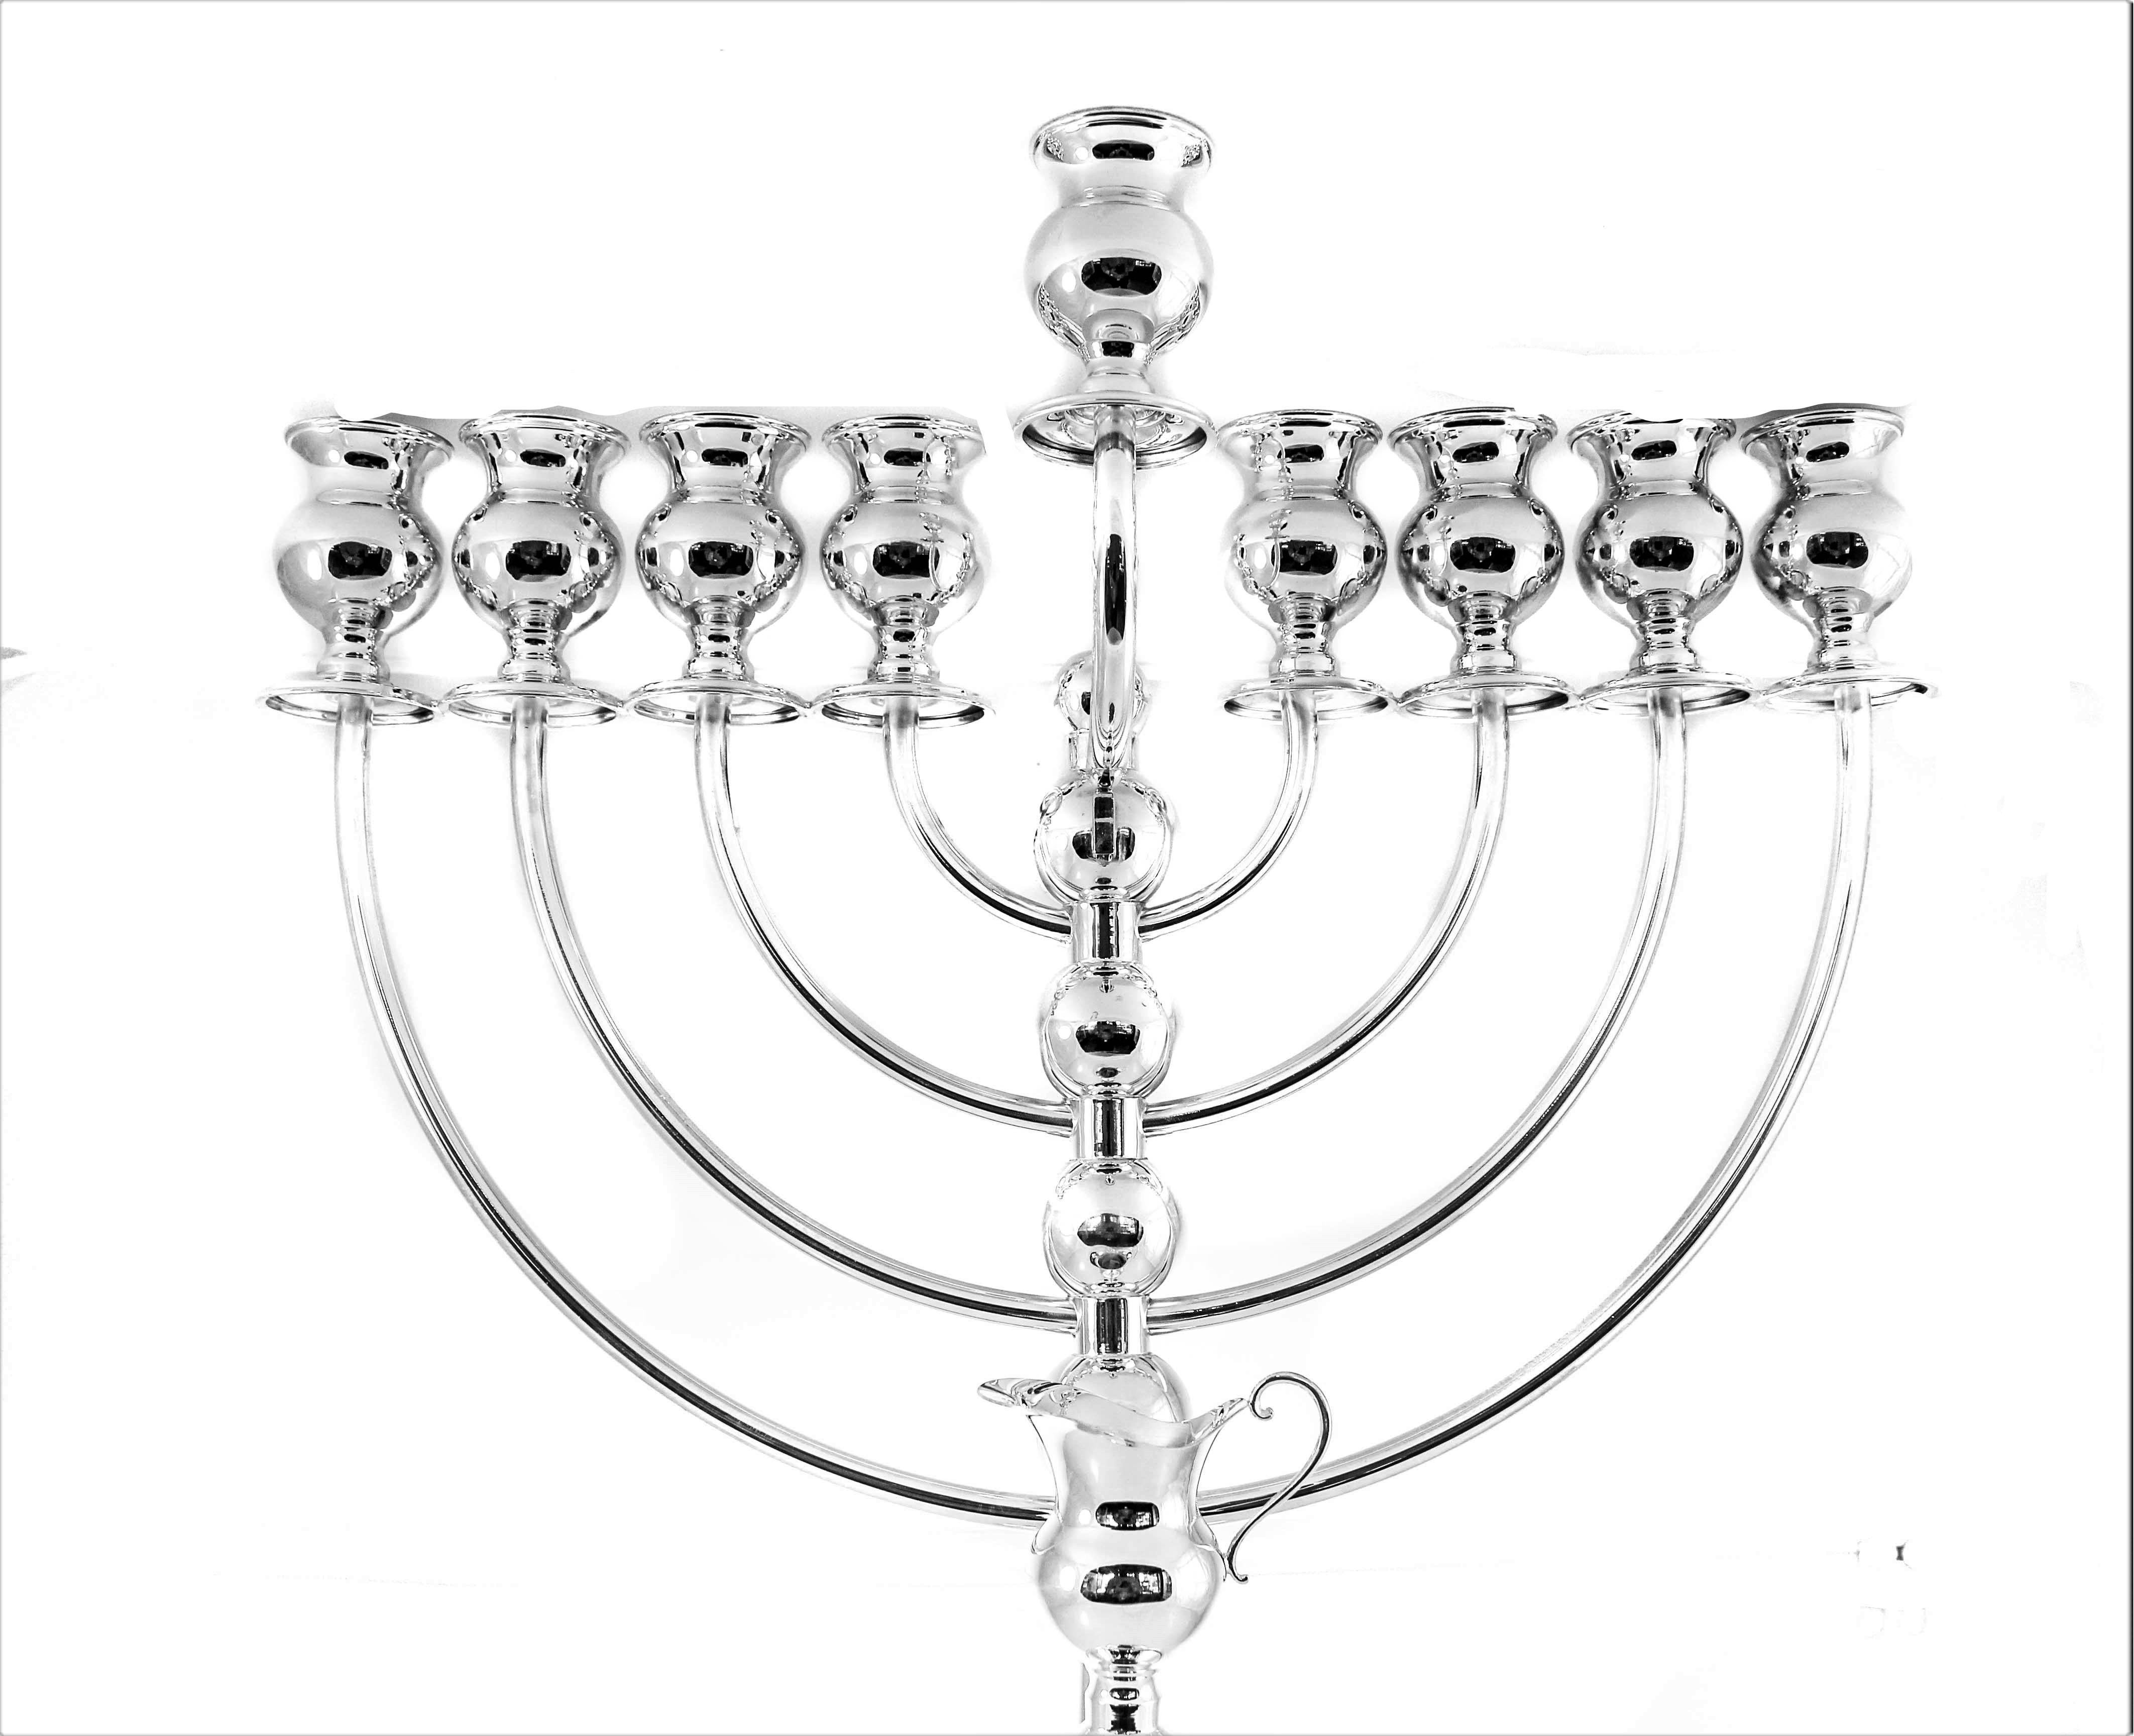 It’s that time of the year, so look no further. This sterling silver menorah will illuminate your home with the joy and pride that is Hanukkah. Uber-modern and sleek, this menorah takes the holiday to a whole different dimension. Four balls on the